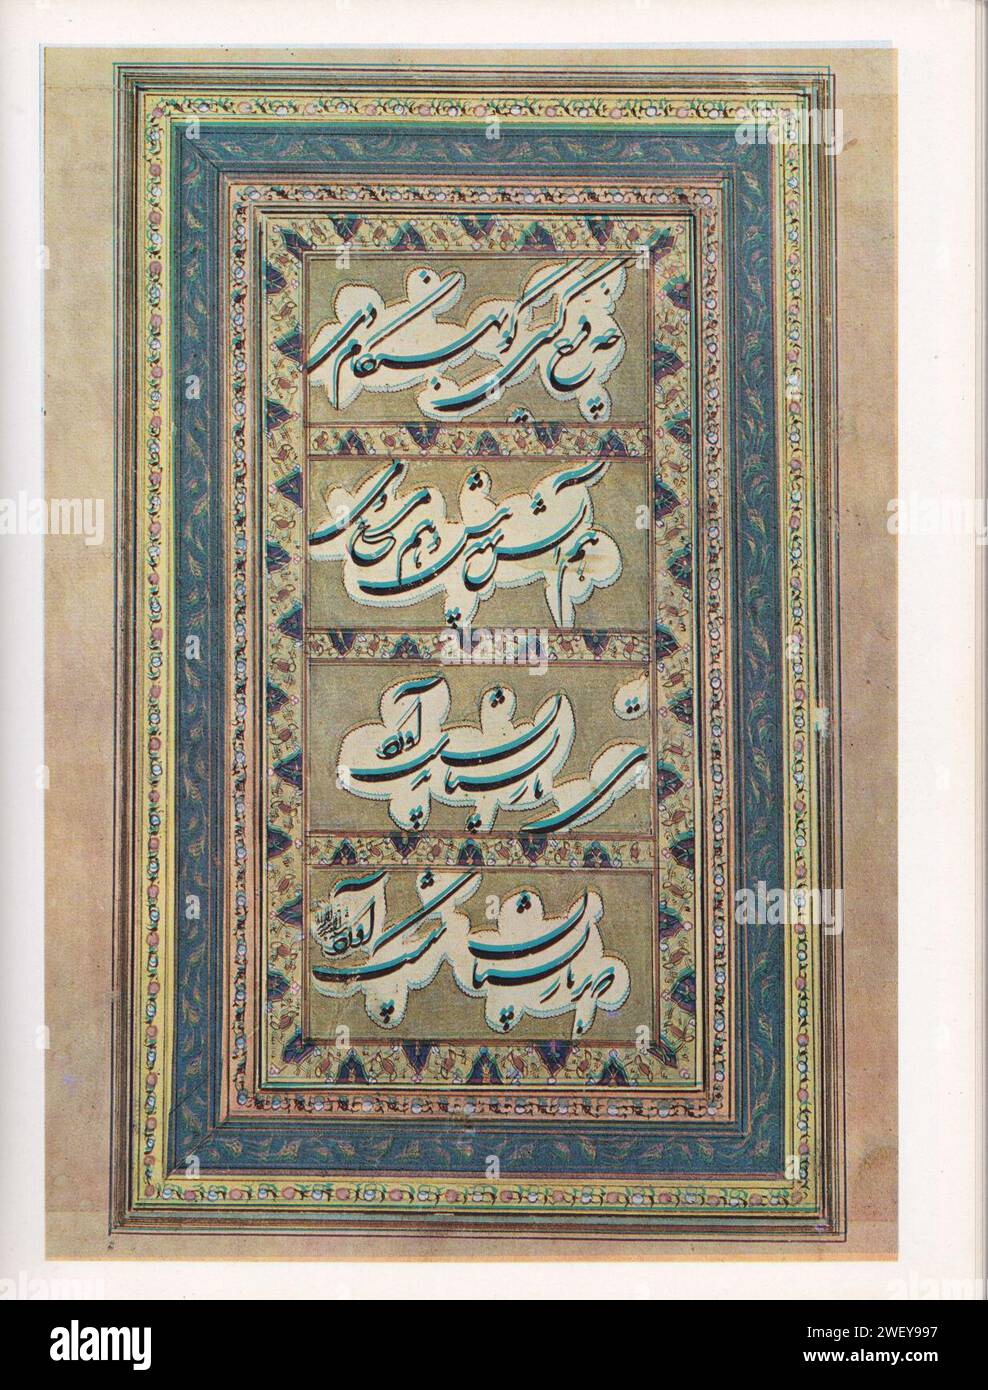 An illuminated panel in Shekasteh script with gilded decoration, Signed by Abd-ol-Majid, 1181 AH. Stock Photo